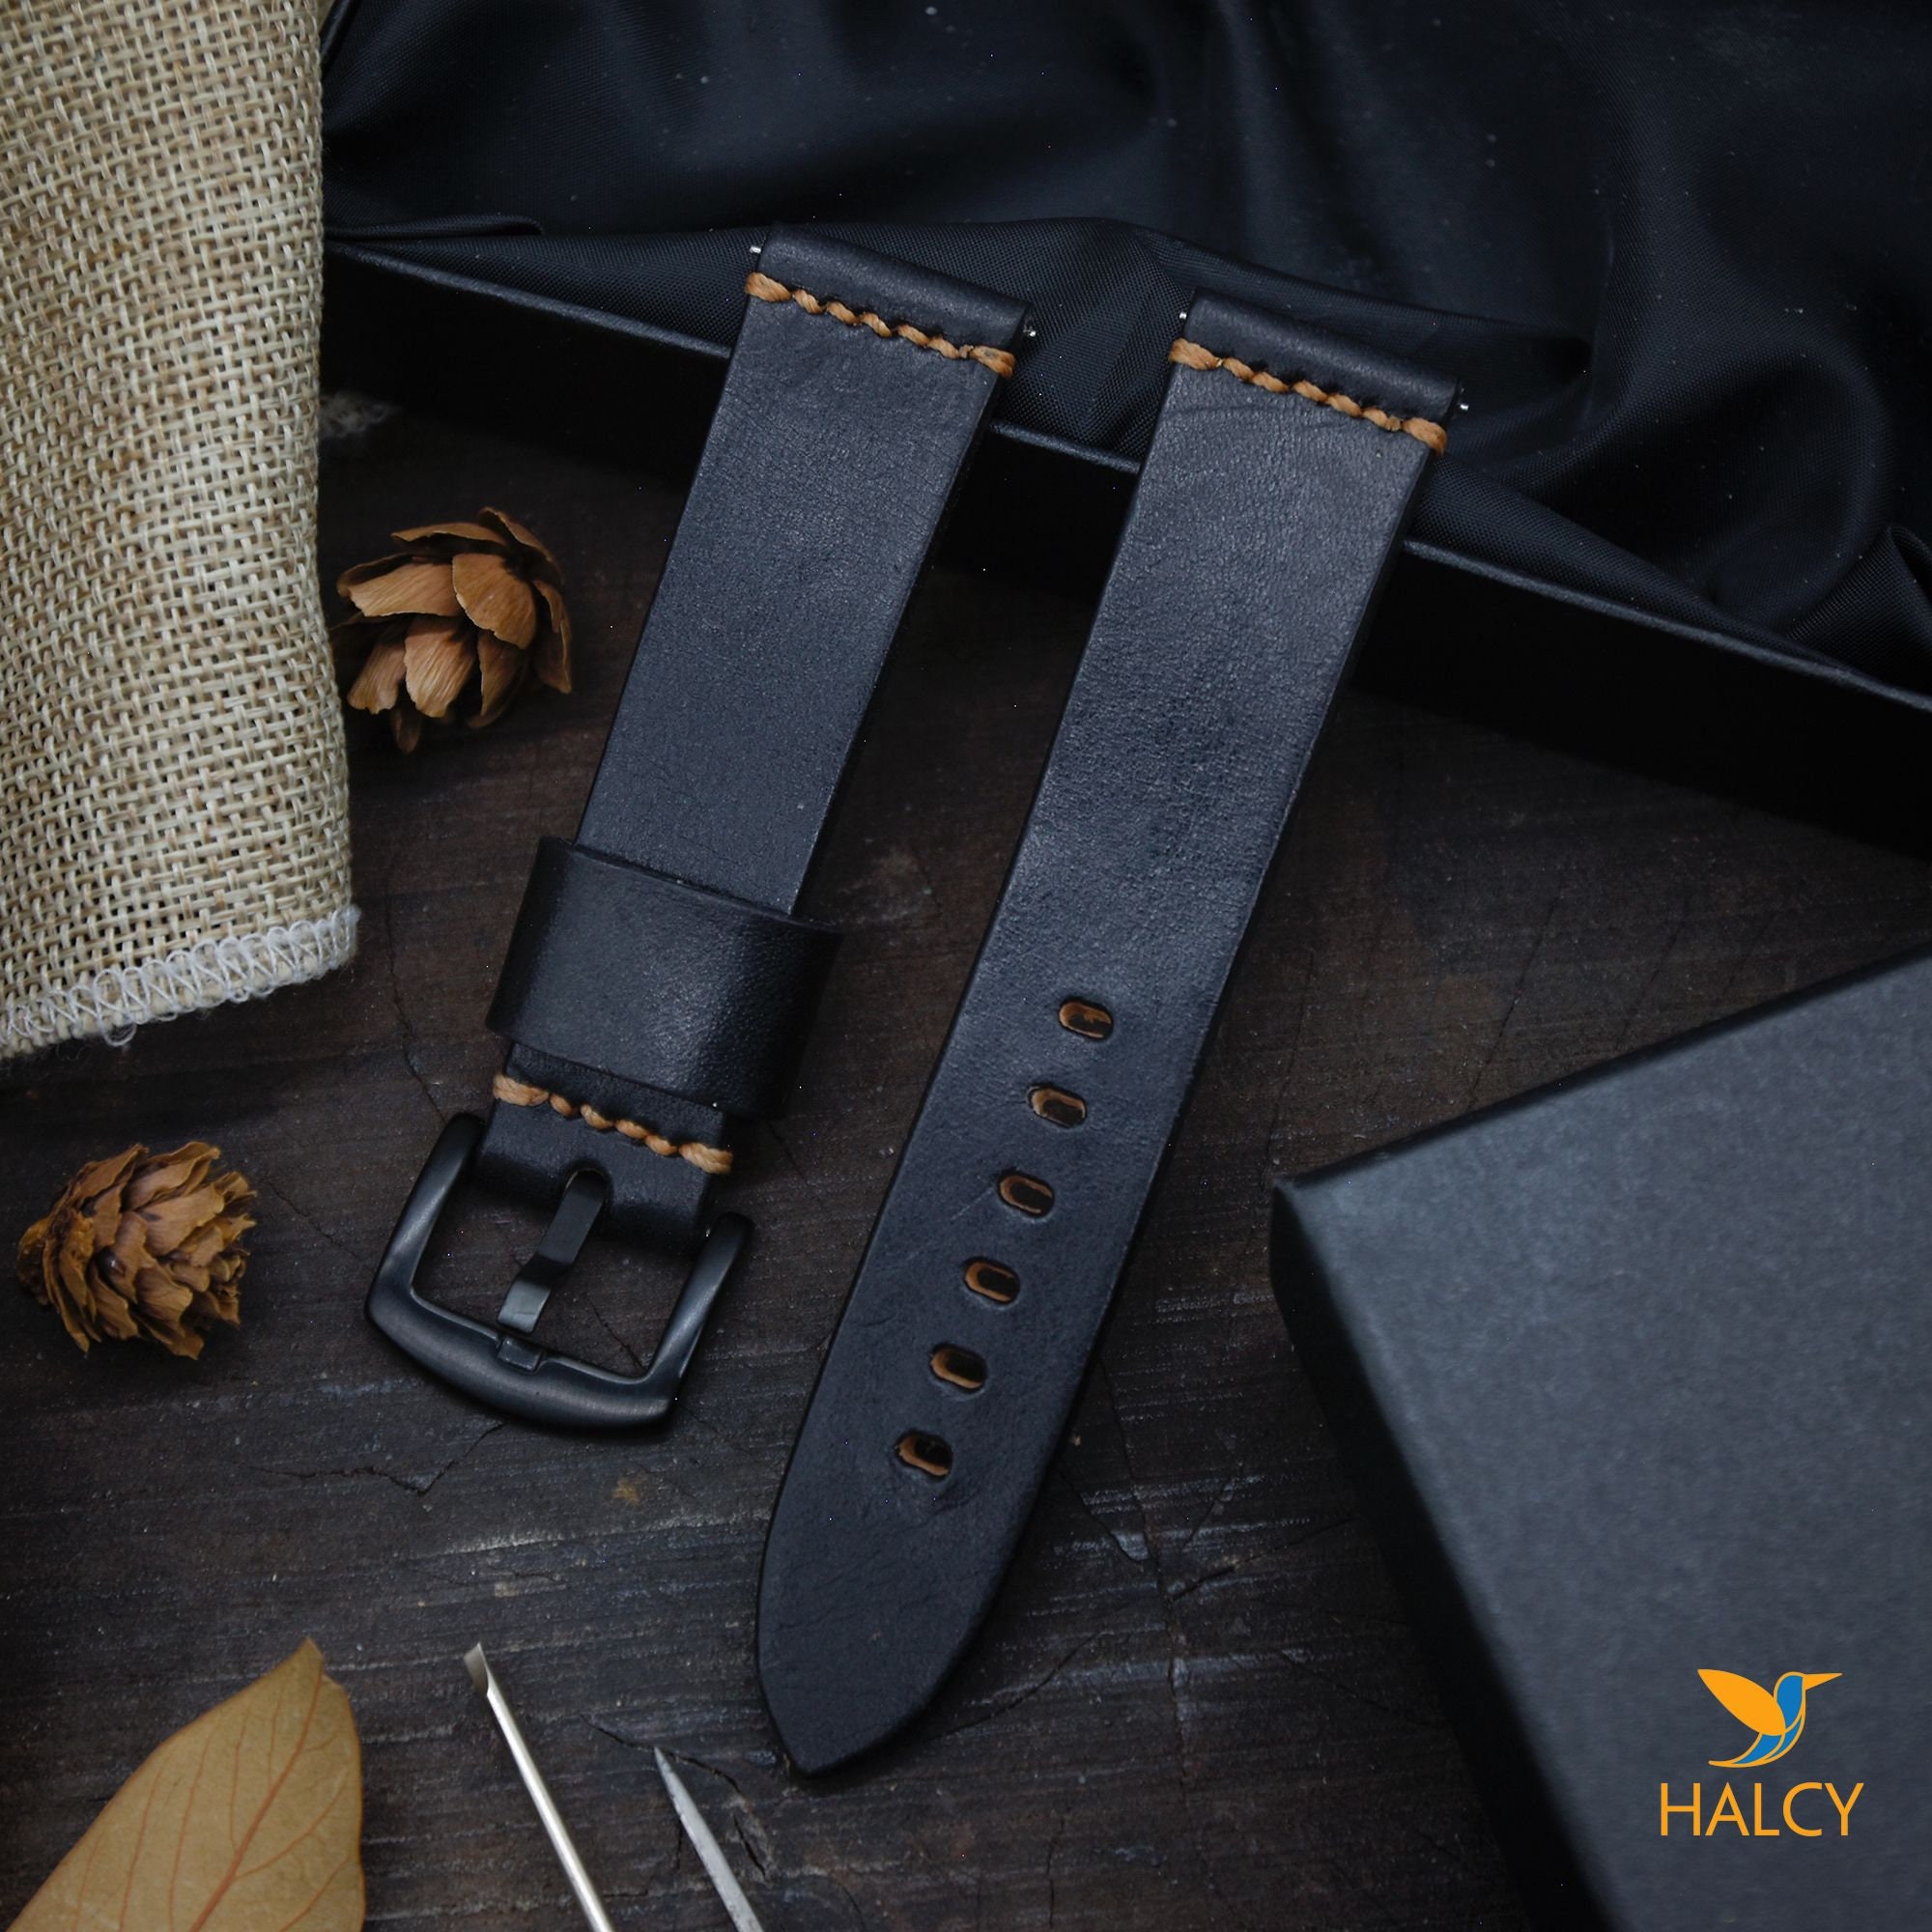 - With Bars, Choice Black Etsy Leather Tanned Choice Quick-release Watch Spring Color Cowhide Italian Vegetable Width, Strap, Buckle of Leather